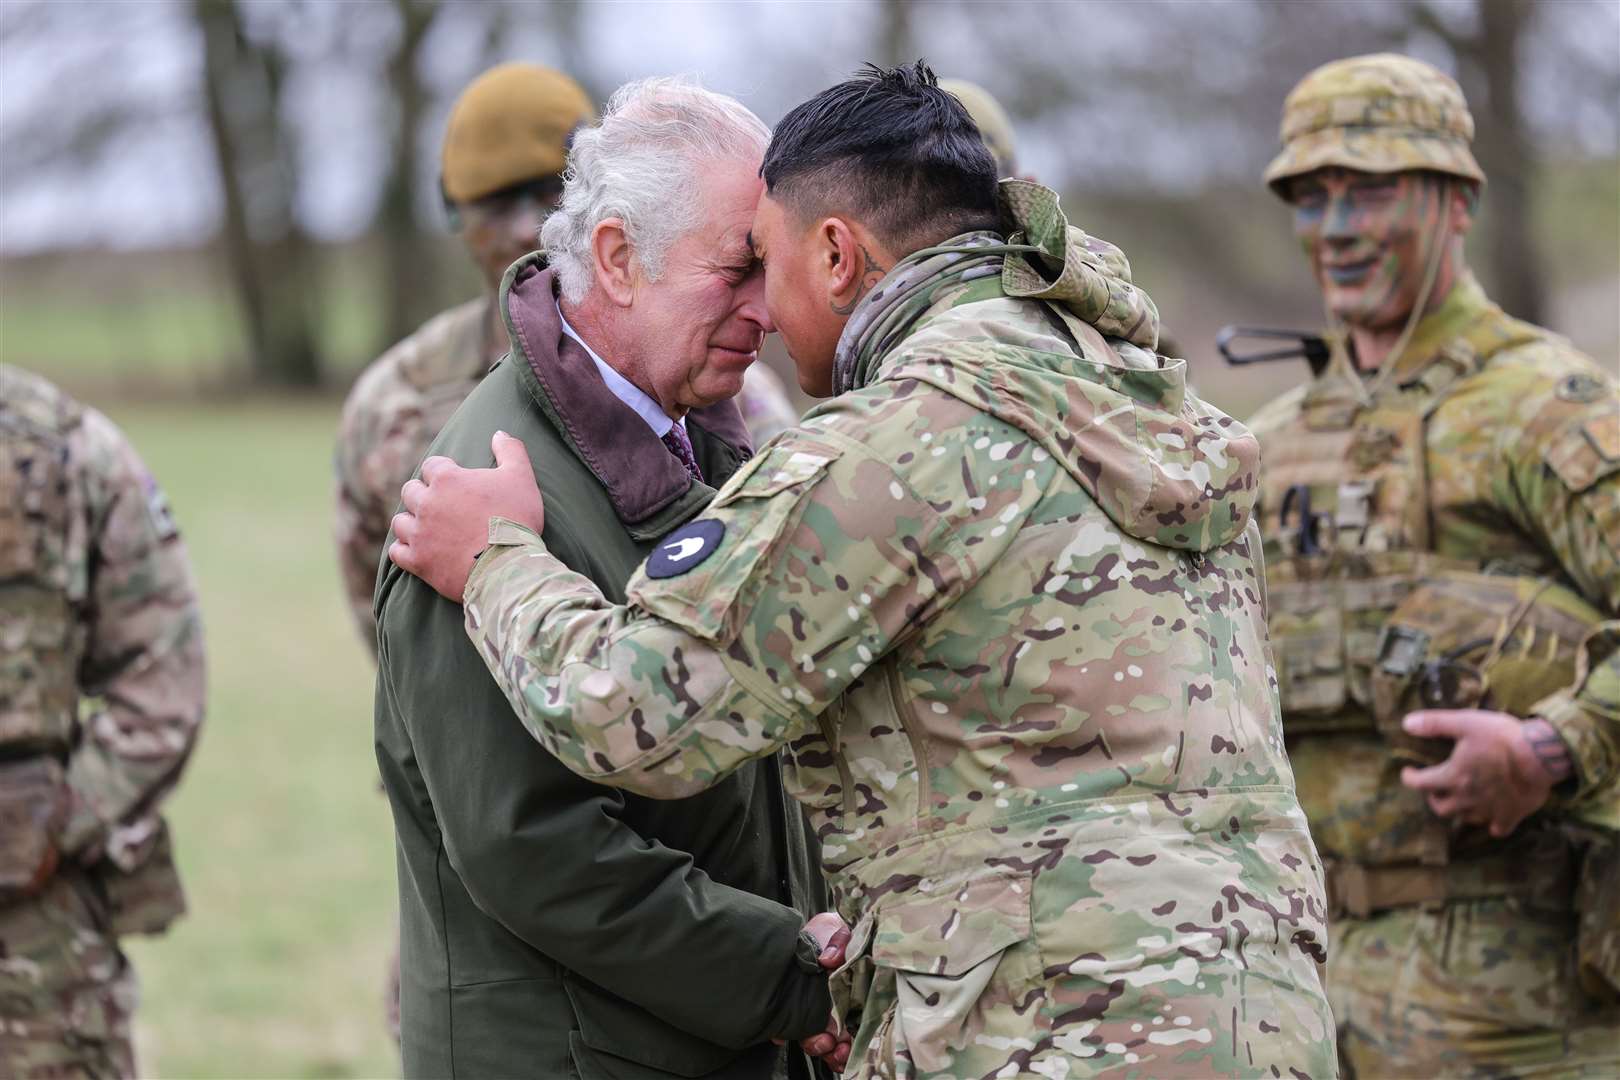 The King receives the hongi from a New Zealander in the Ukrainian contingent during a visit to a training site for Ukrainian military recruits (Chris Jackson/PA)